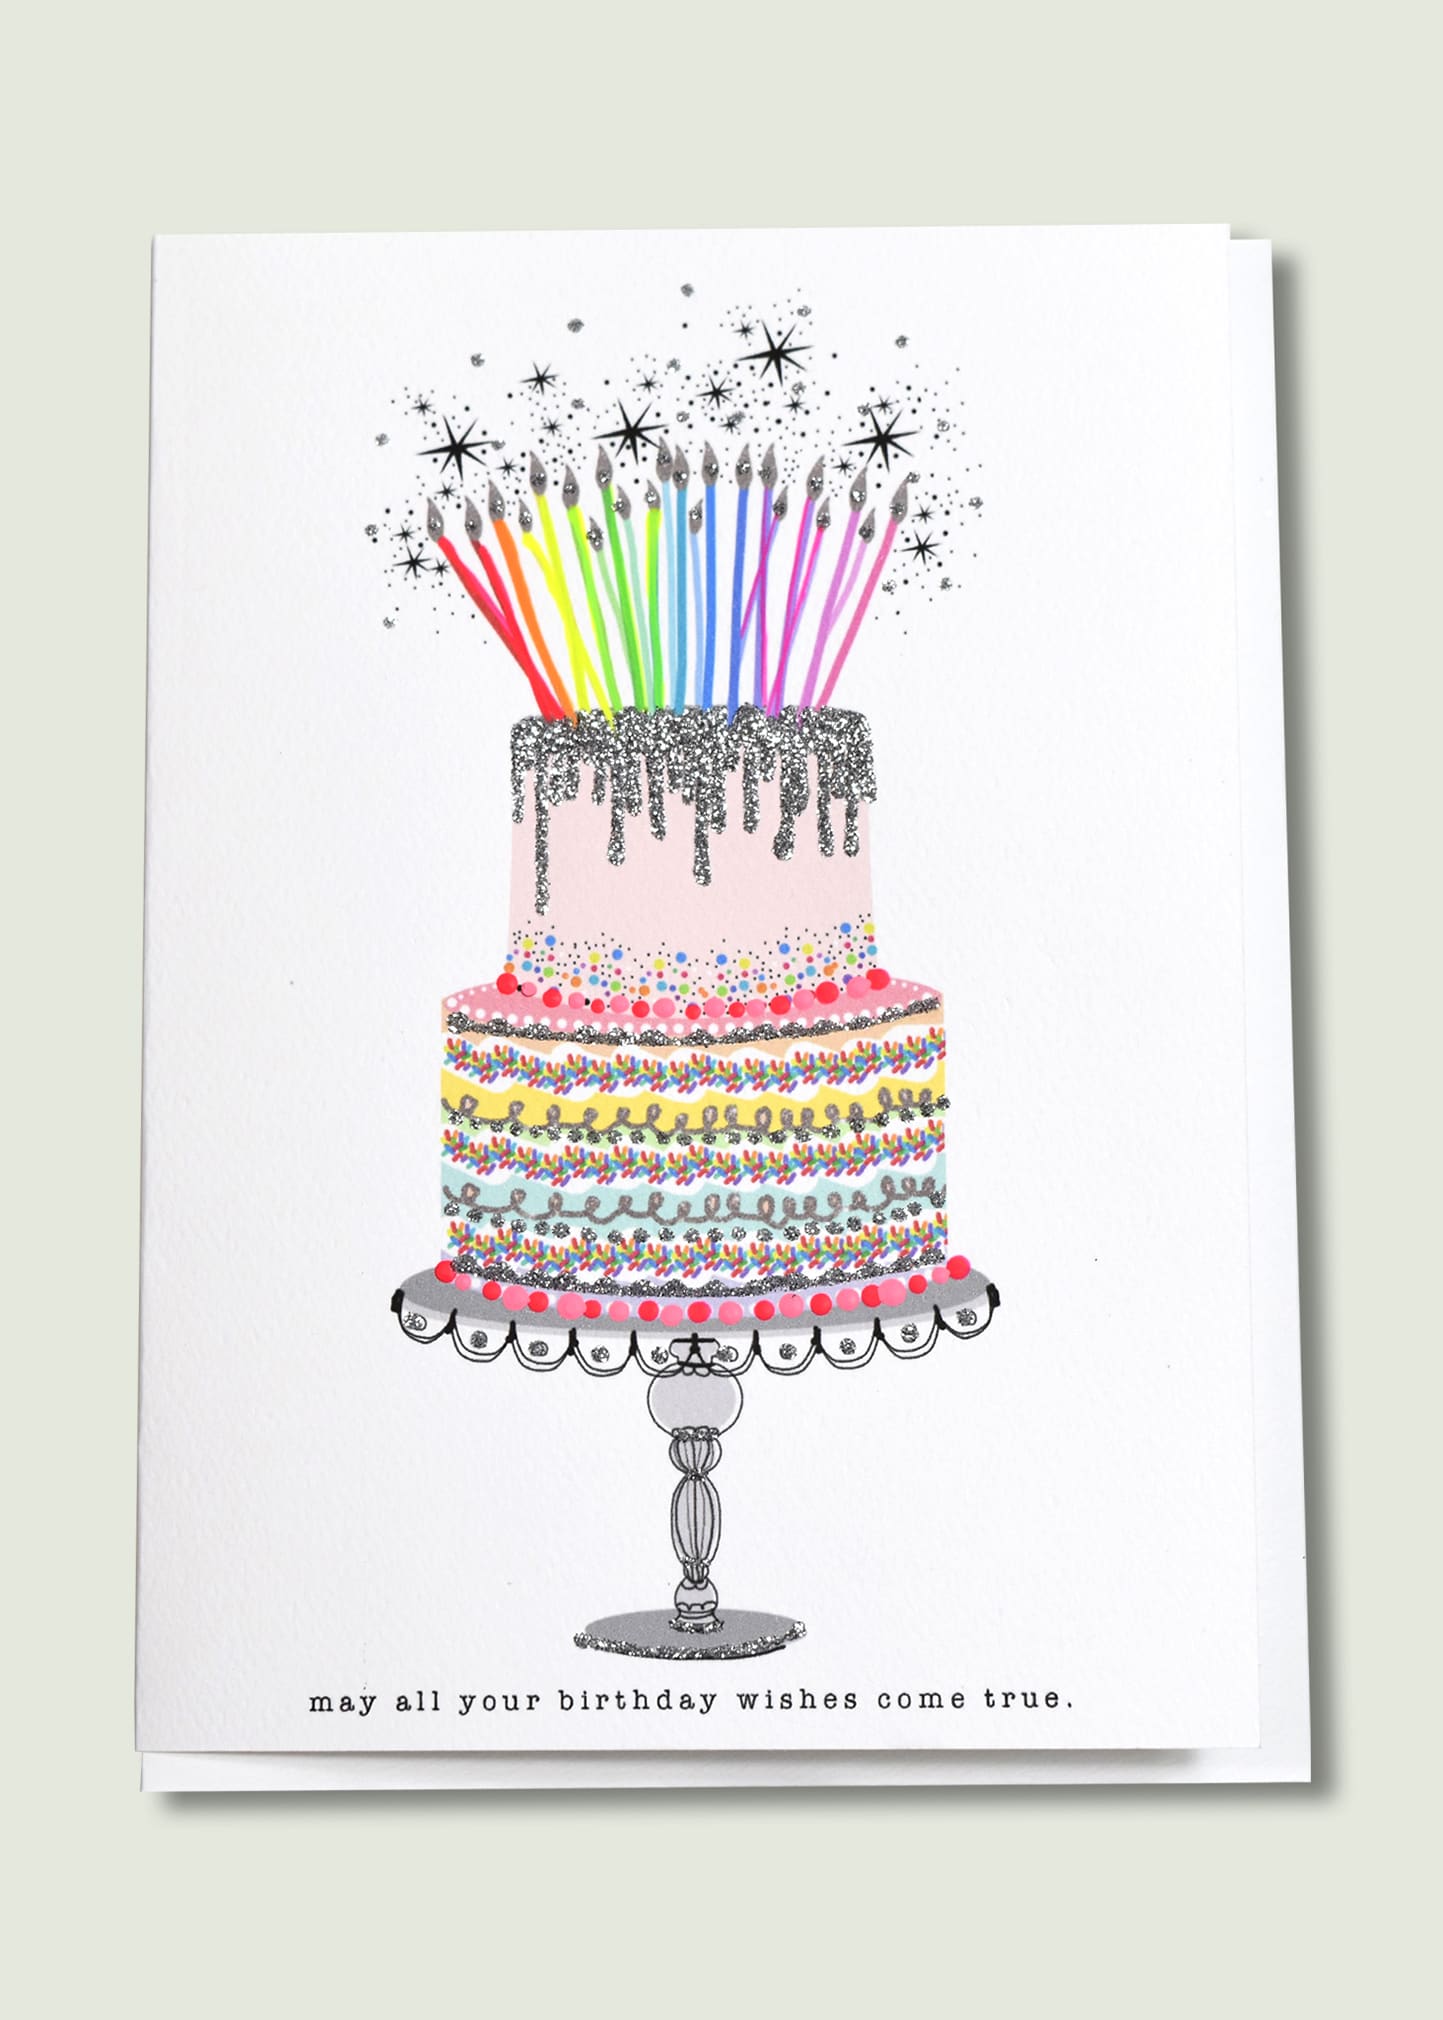 Verrier May All Your Birthday Wishes Come True Greeting Card In Multi